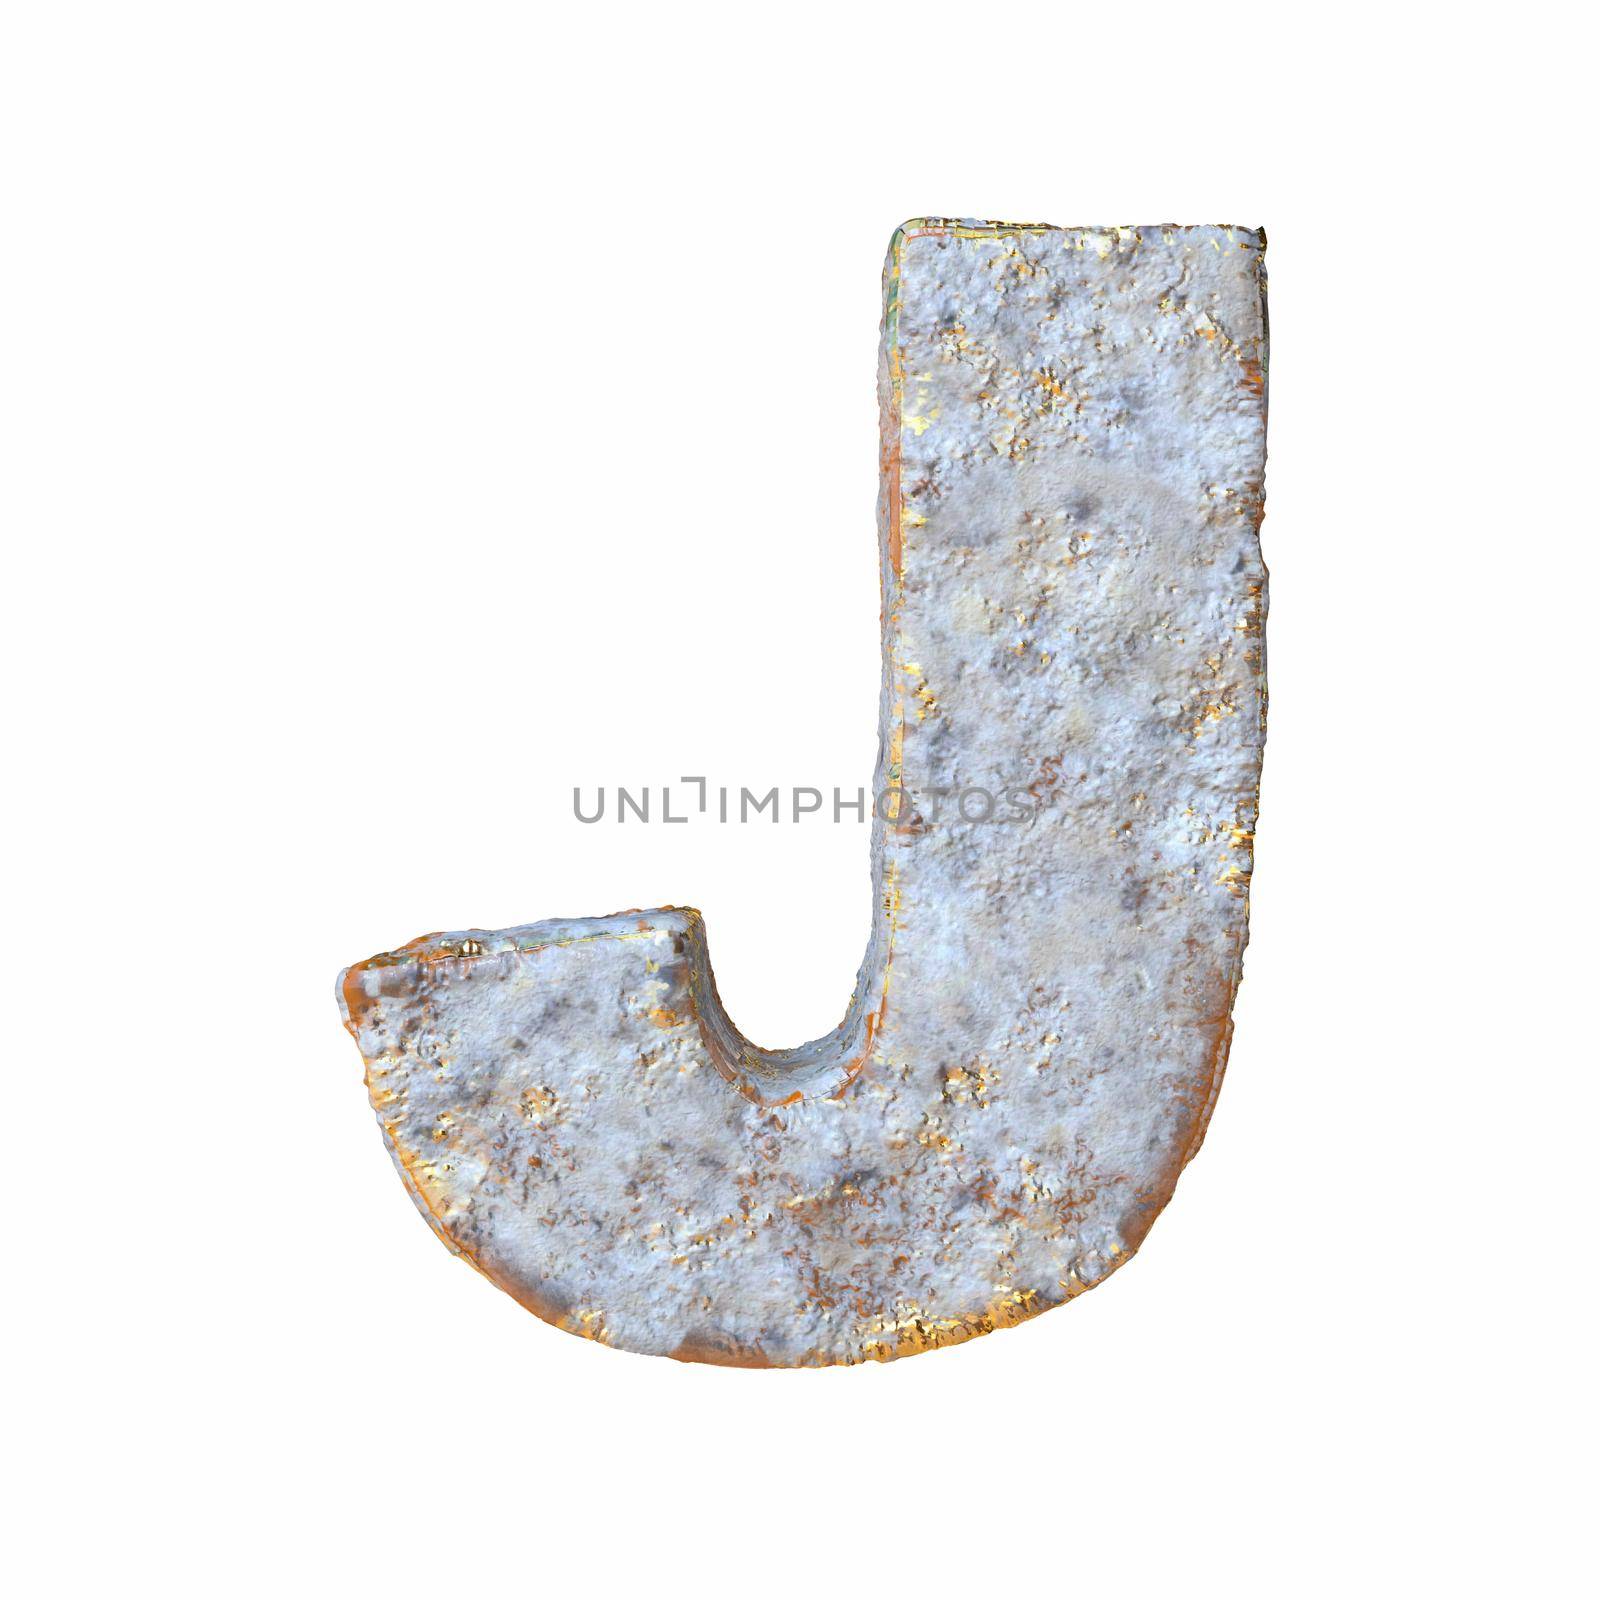 Stone with golden metal particles Letter J 3D rendering illustration isolated on white background